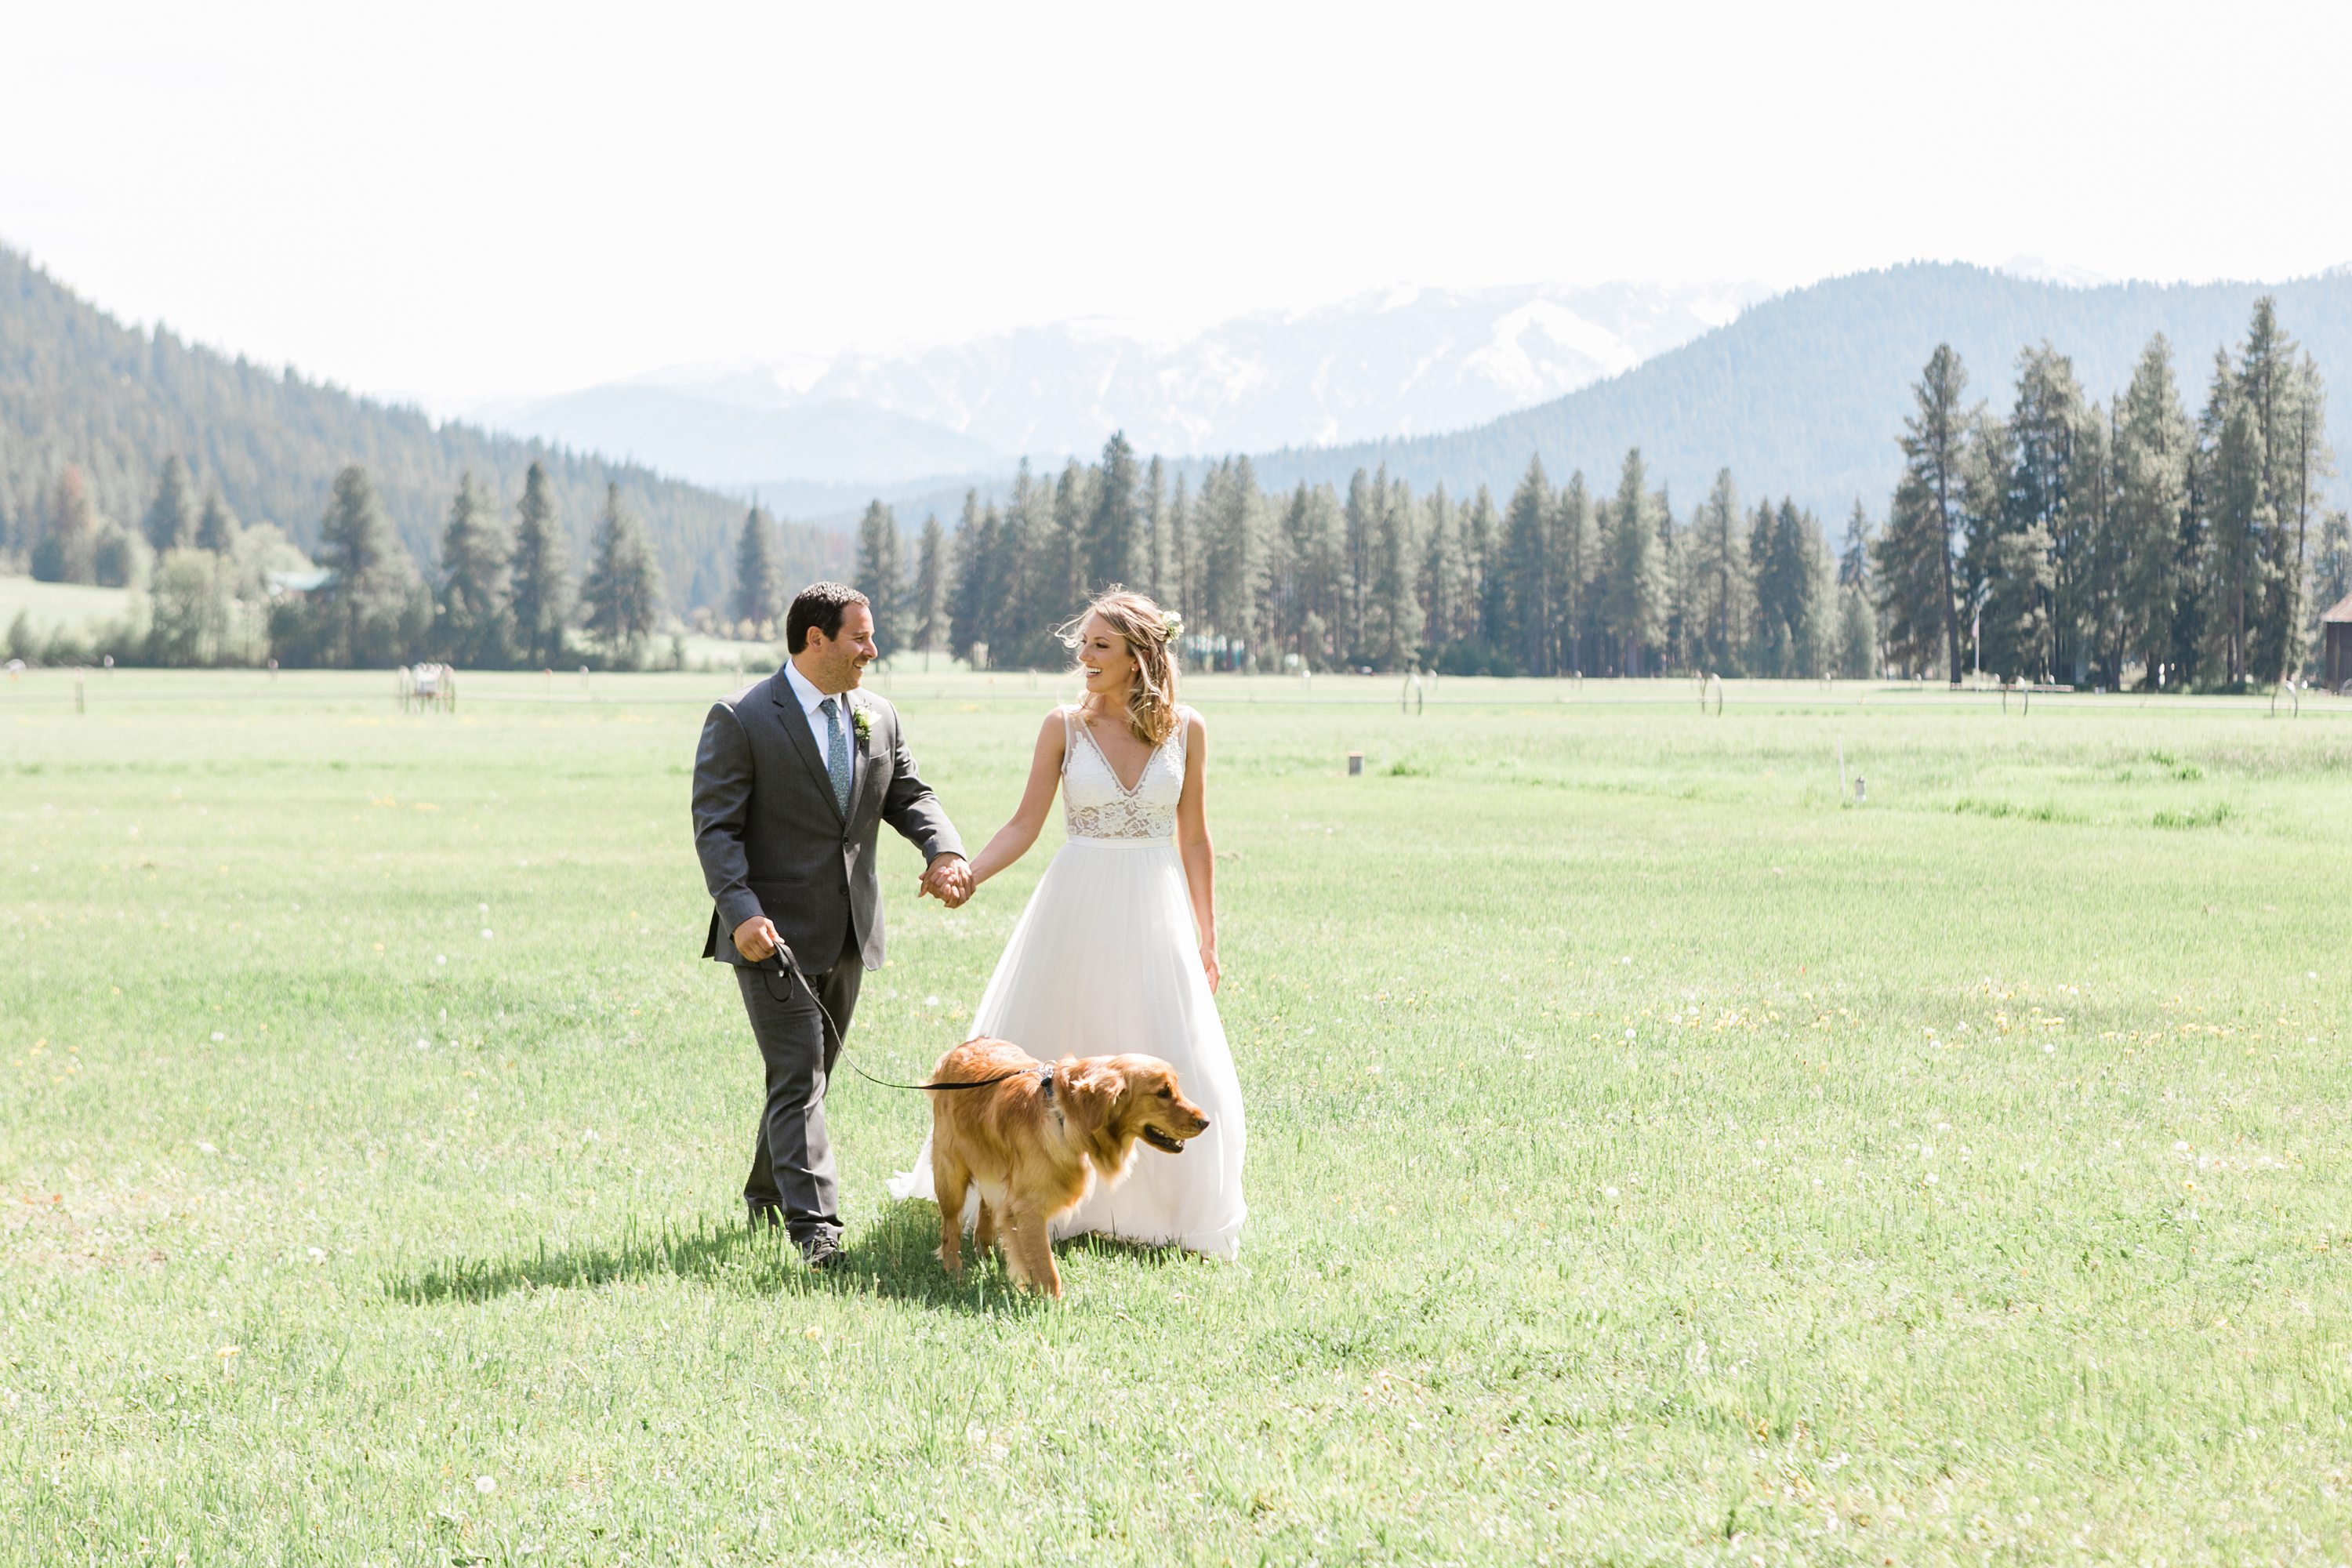 boise wedding venues,dog at wedding,bride and groom with dog,country wedding,mountain weddings